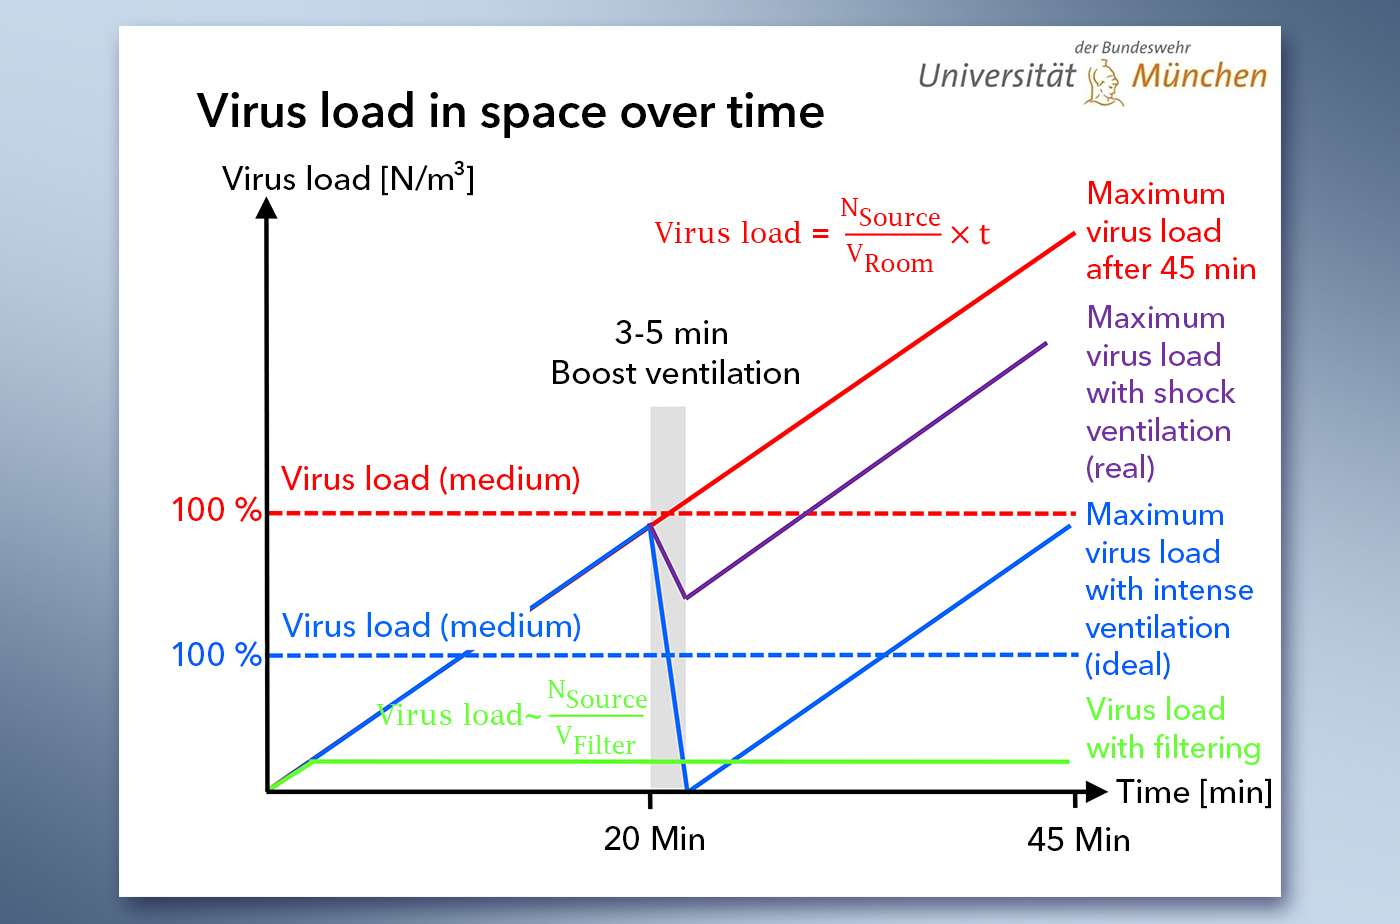 Diagram "Virus load in the room over time"